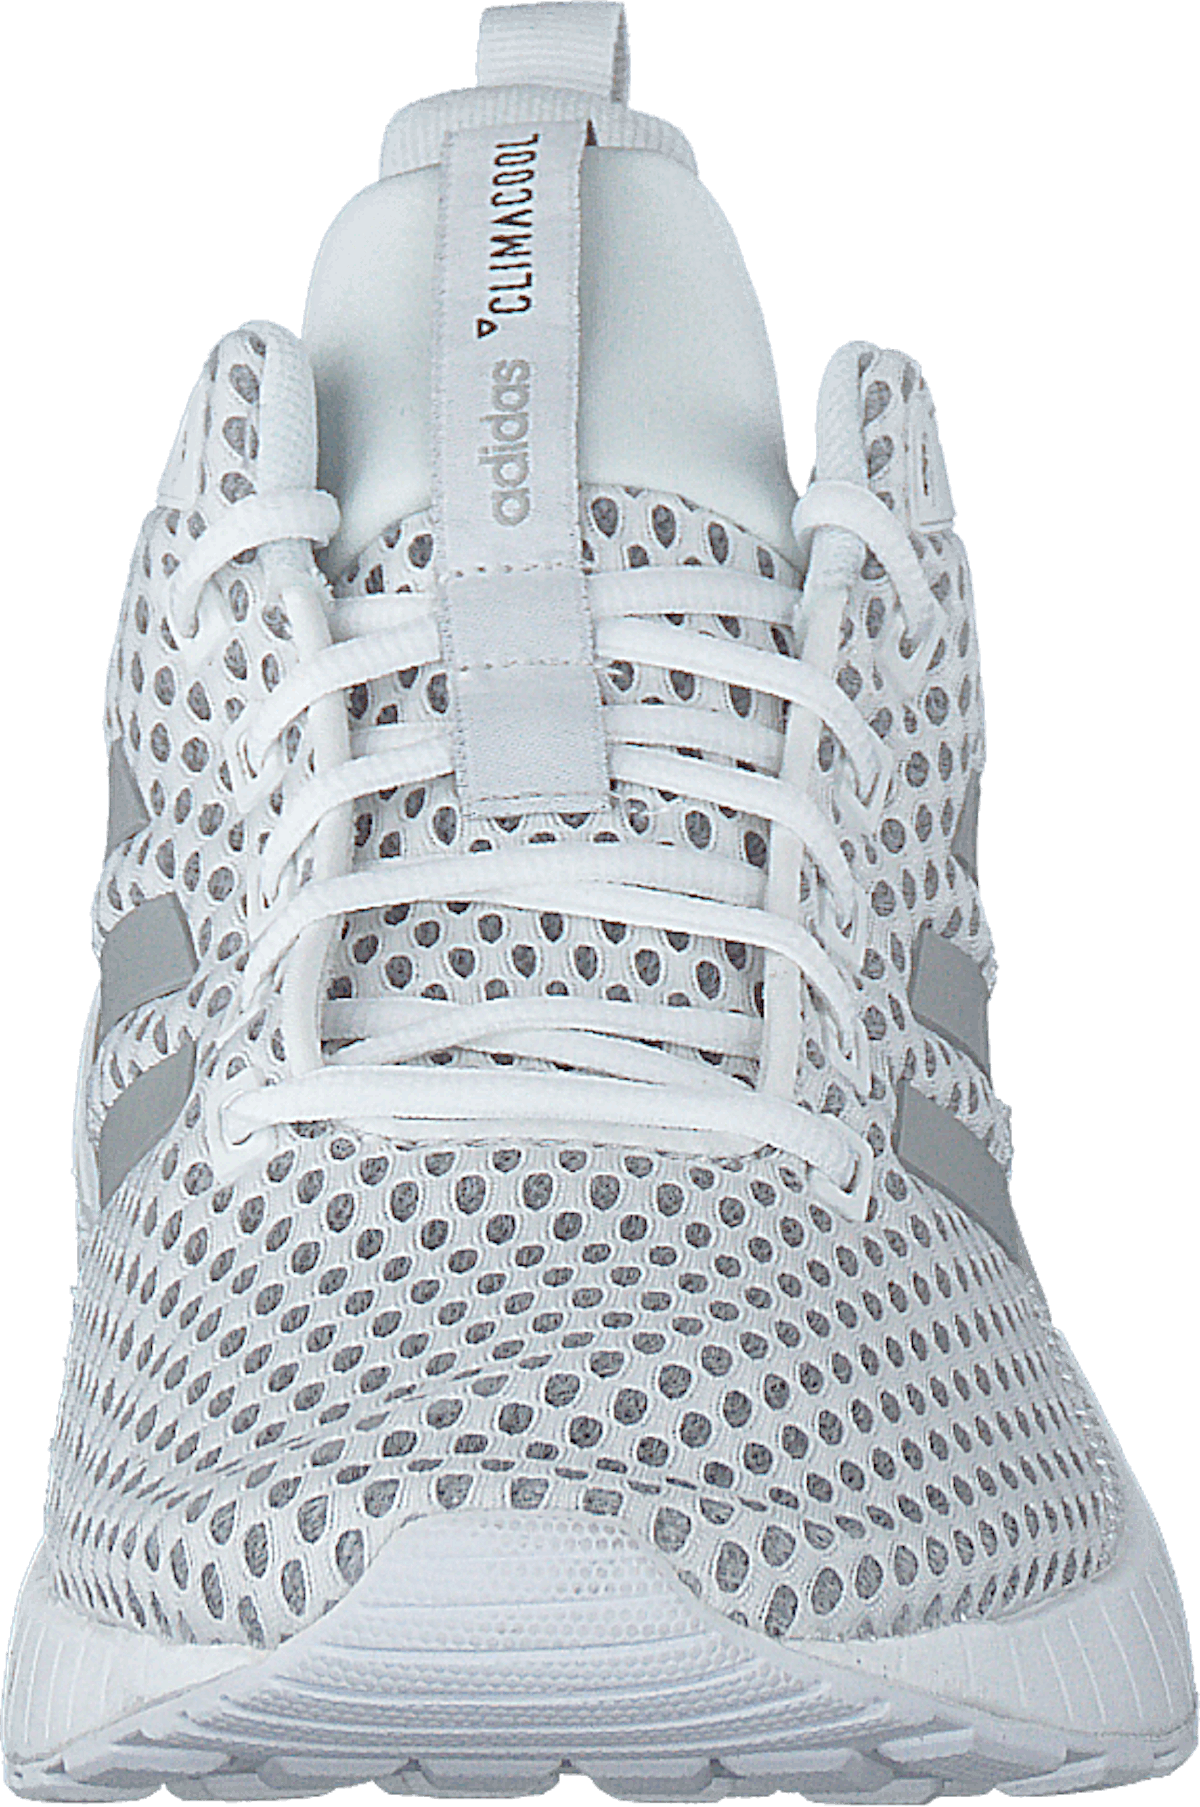 Questar Climacool Ftwe White